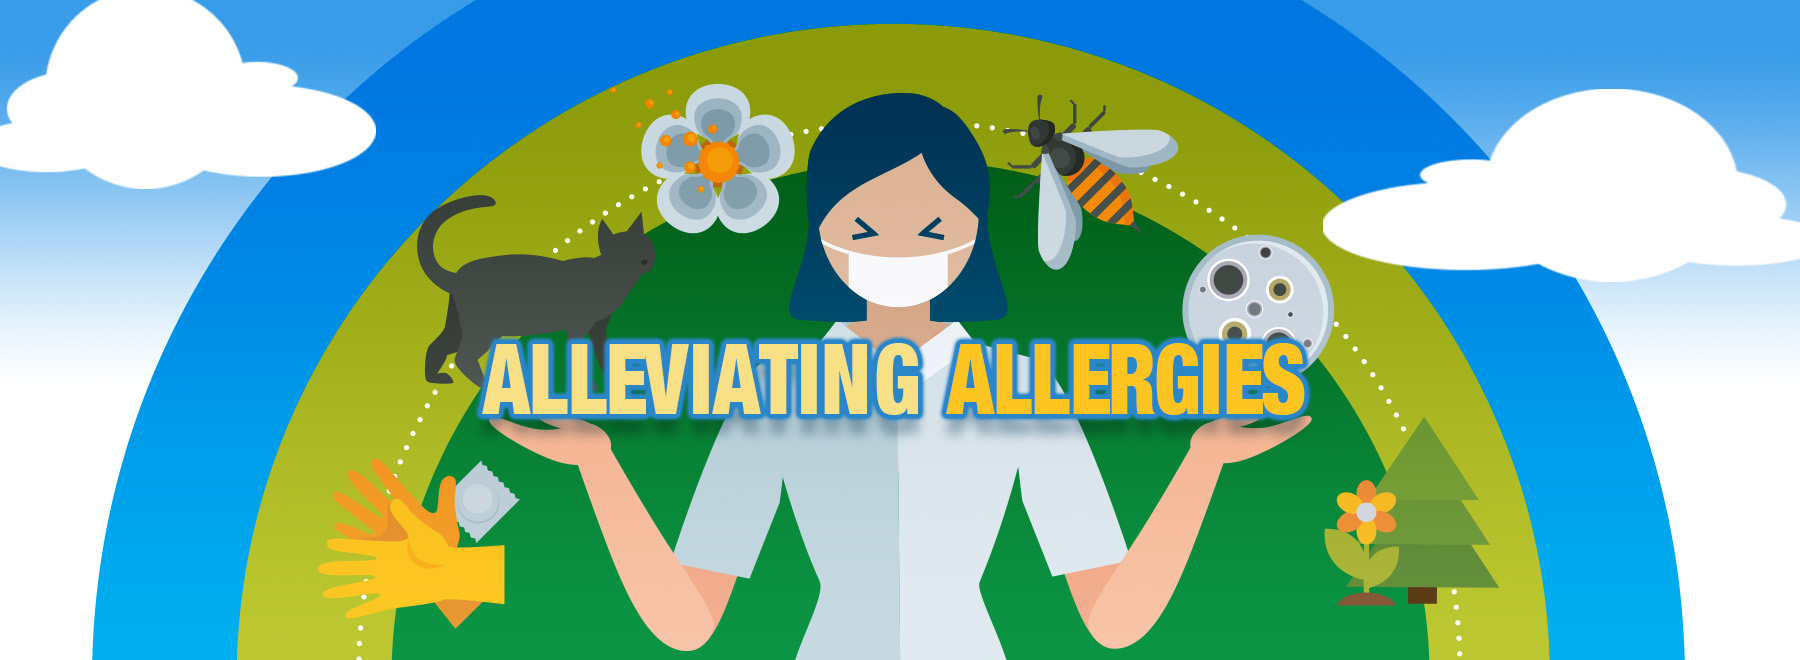 Graphic for preventive medicine in regards to allergies, shows various allergy inducing elements as icons